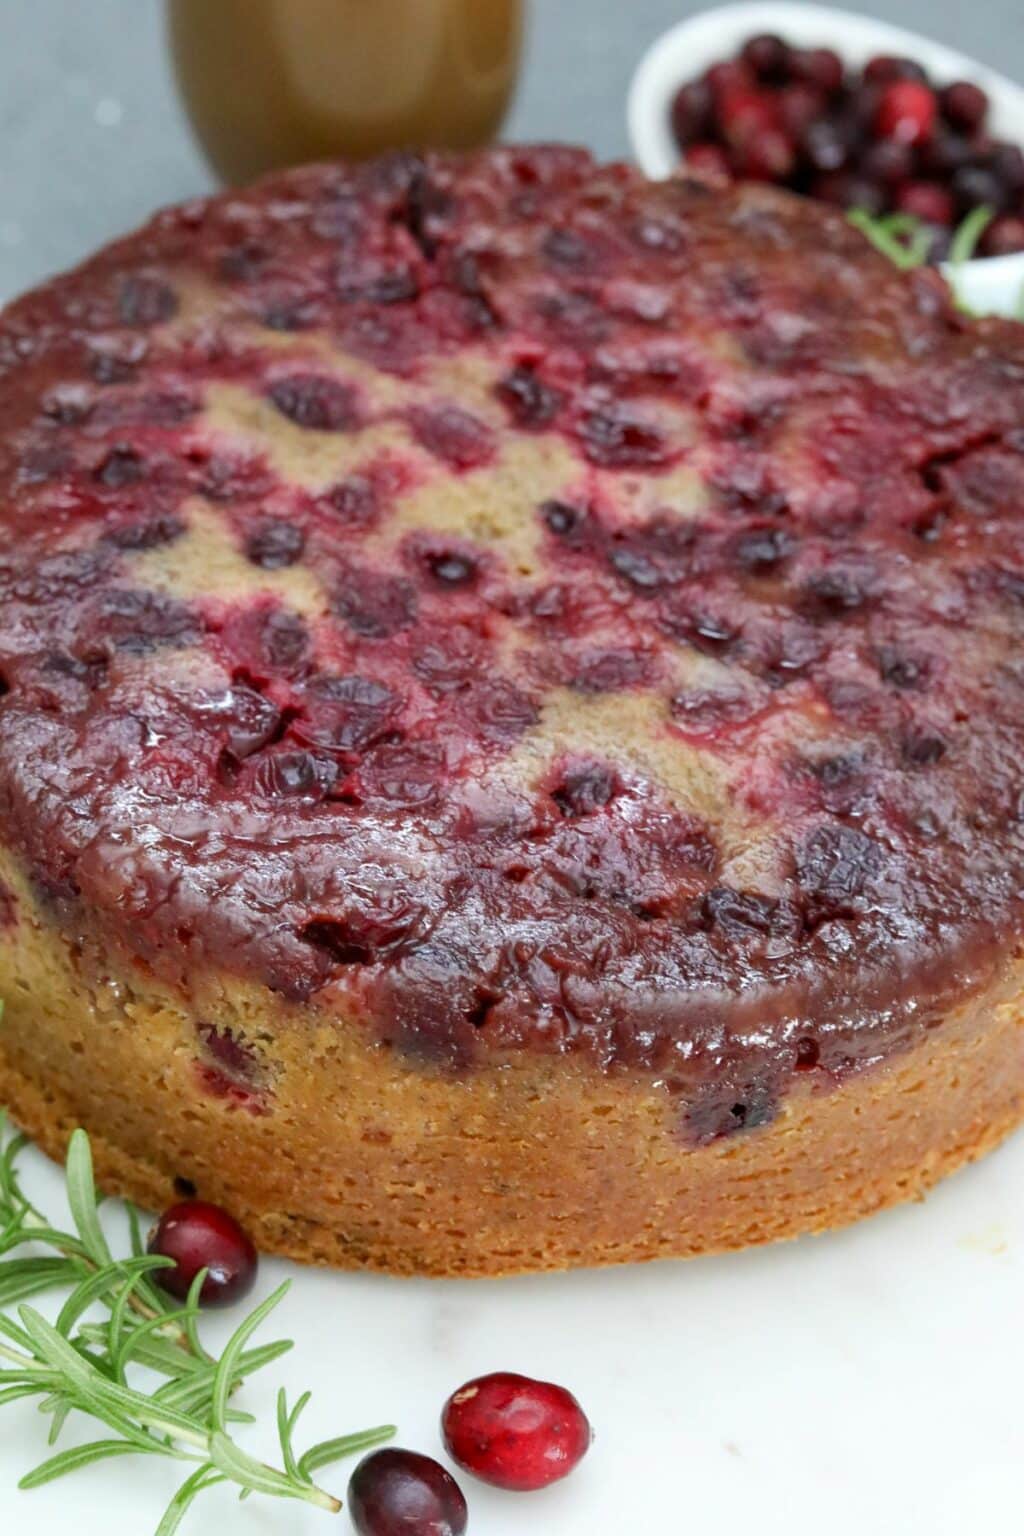 Cranberry and Walnut Upside-Down Cake - Man Meets Oven